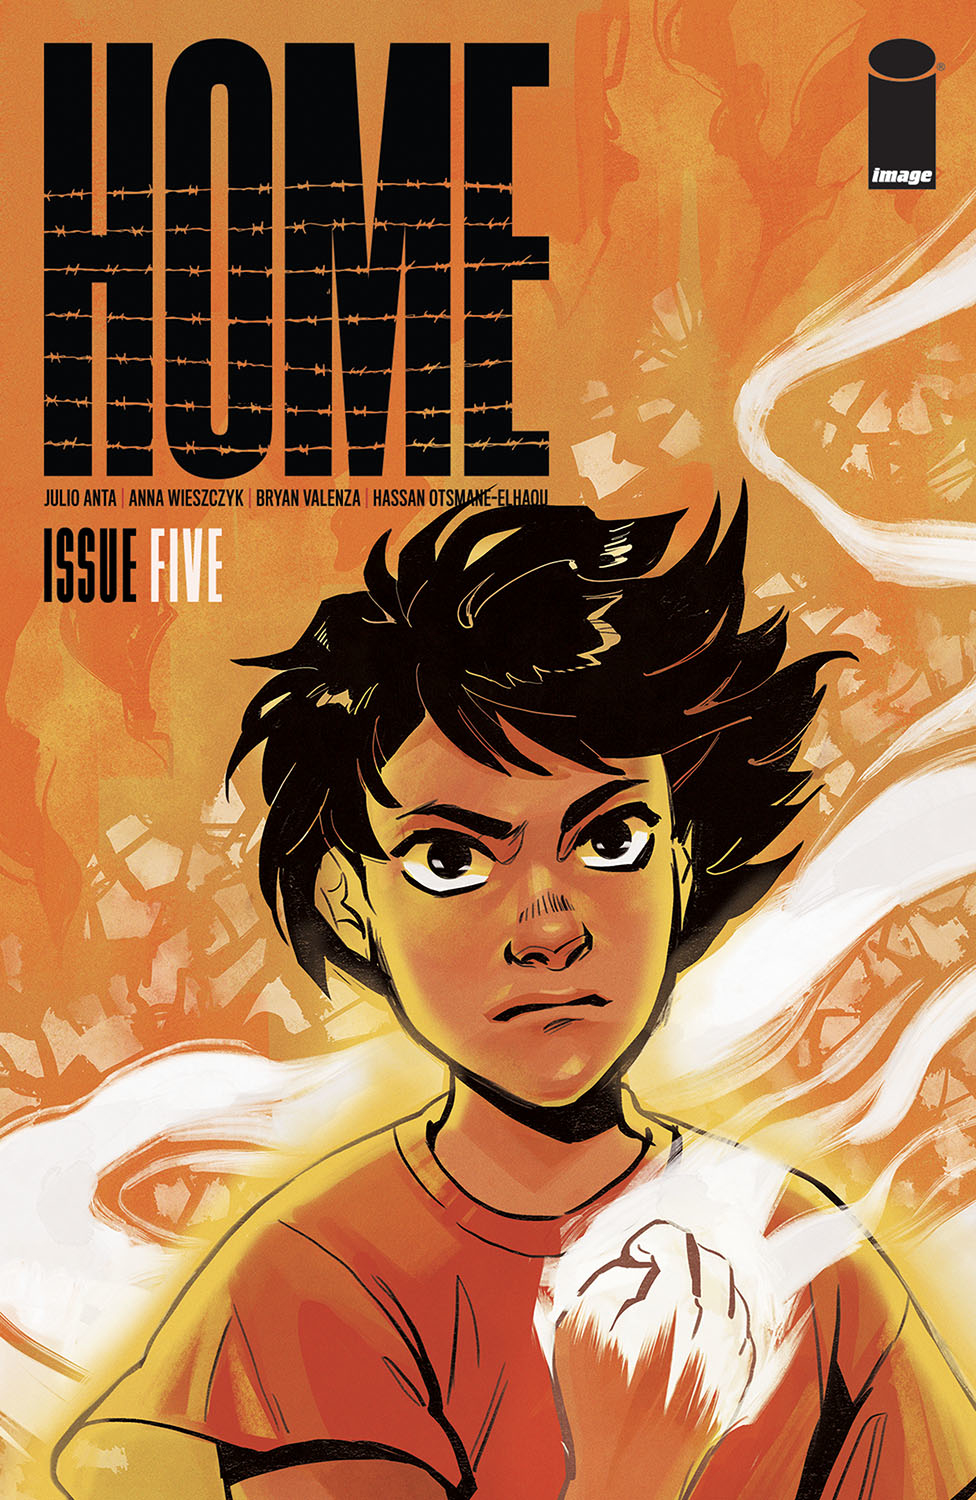 Home #5 Cover A Sterle (Of 5)